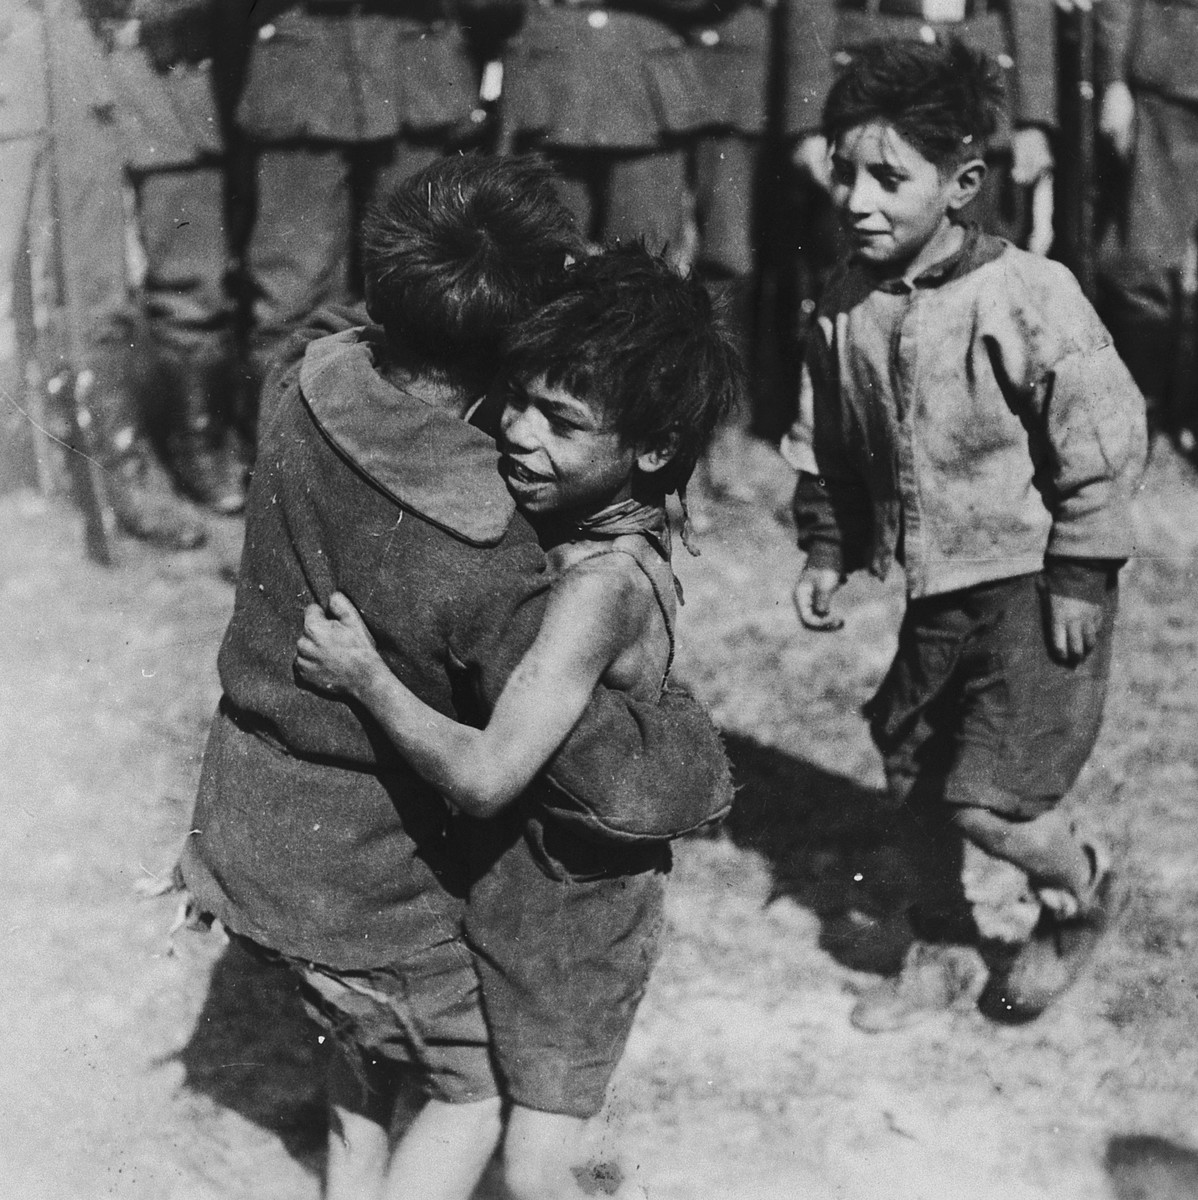 Two young Romani children embrace while a third looks on.